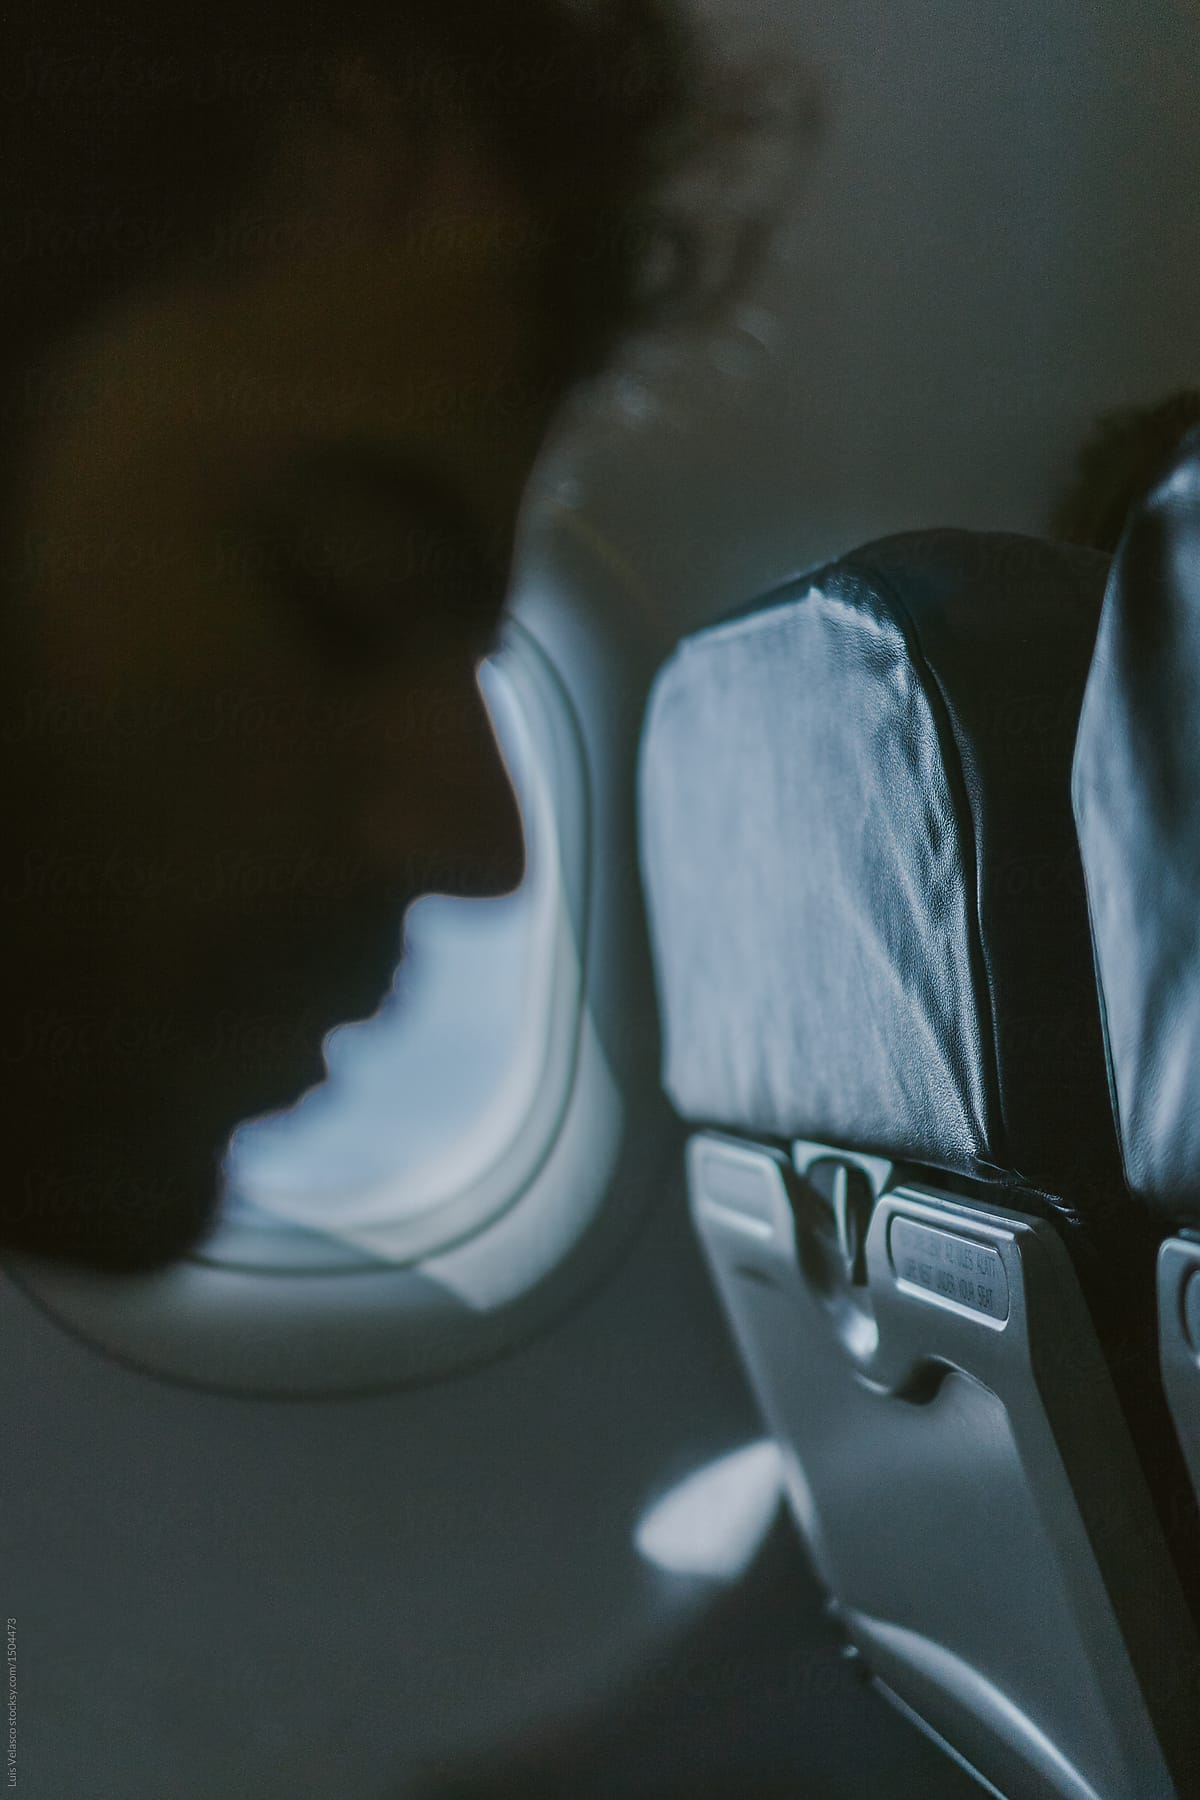 Silhouette of a Man Sitting in an Aircraft.
Looking Out from Airplane Window.